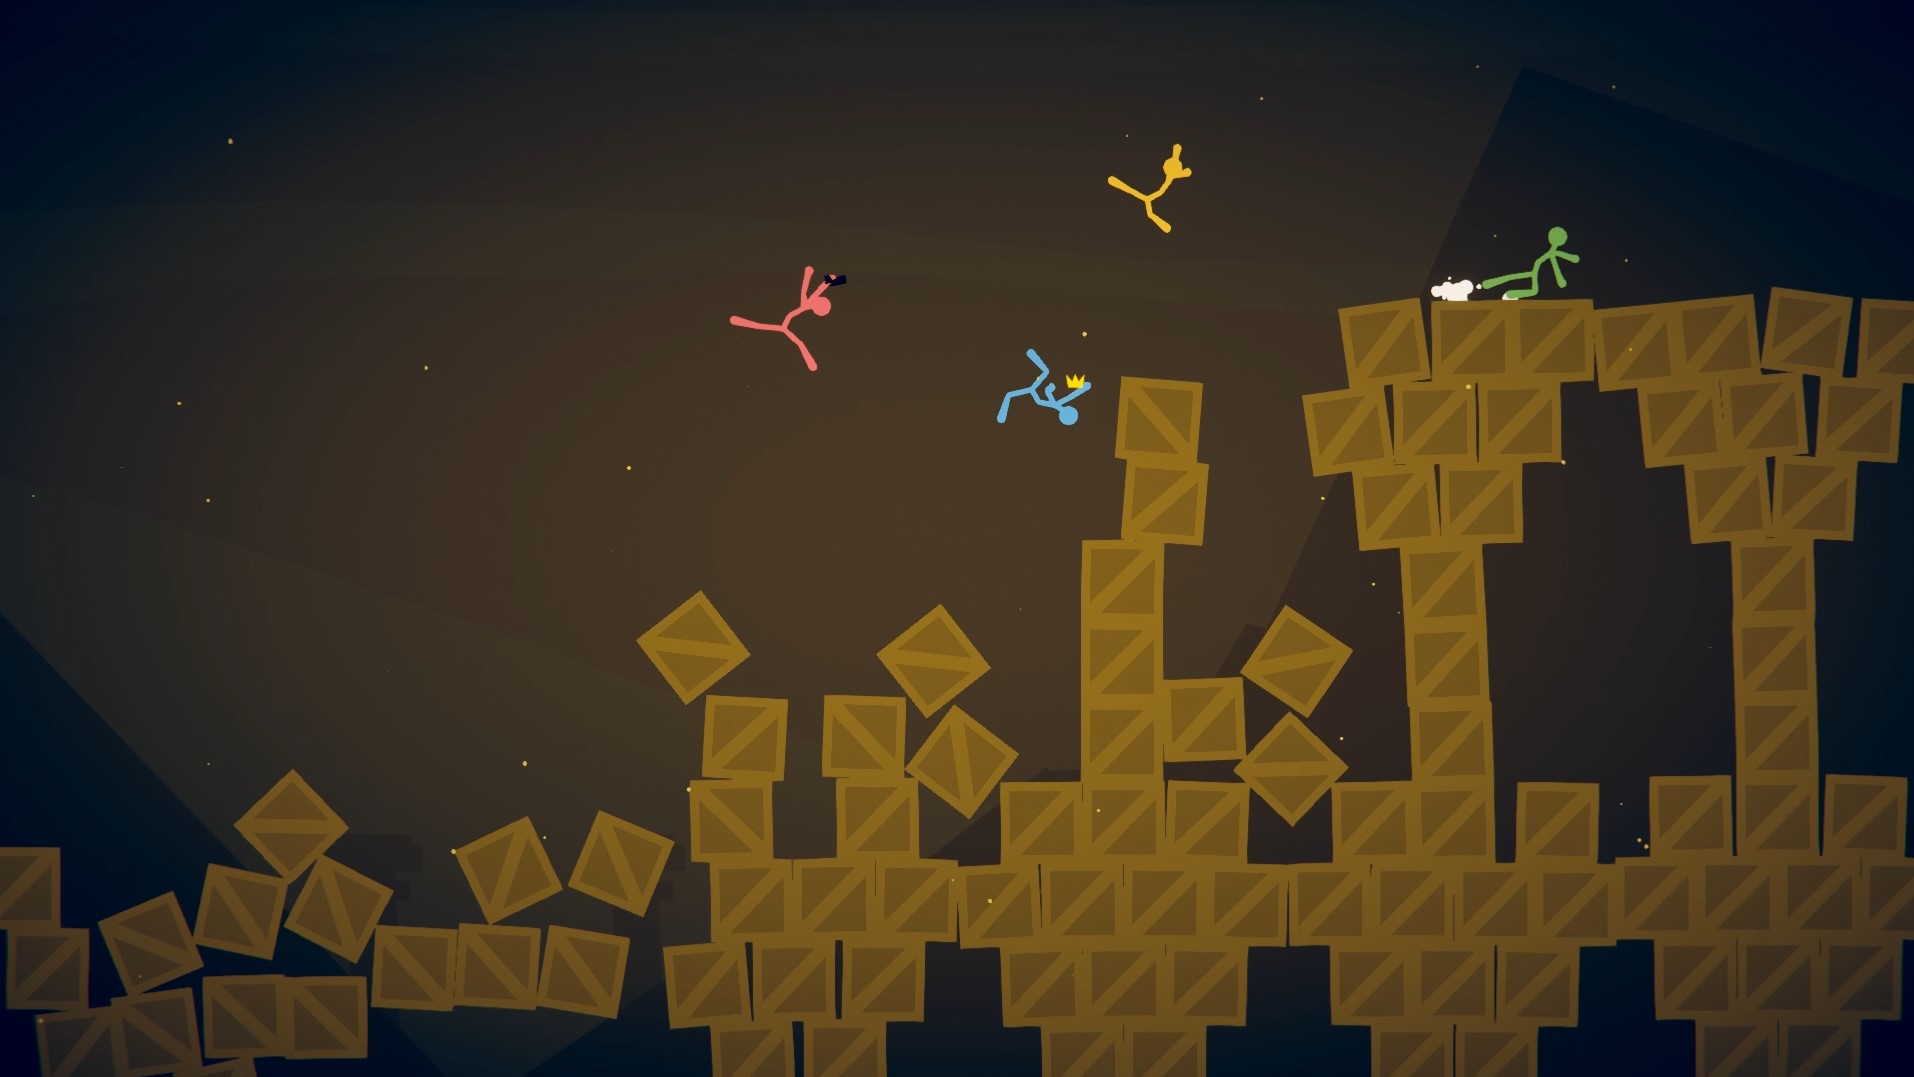 Save 60% on Stick Fight: The Game OST on Steam